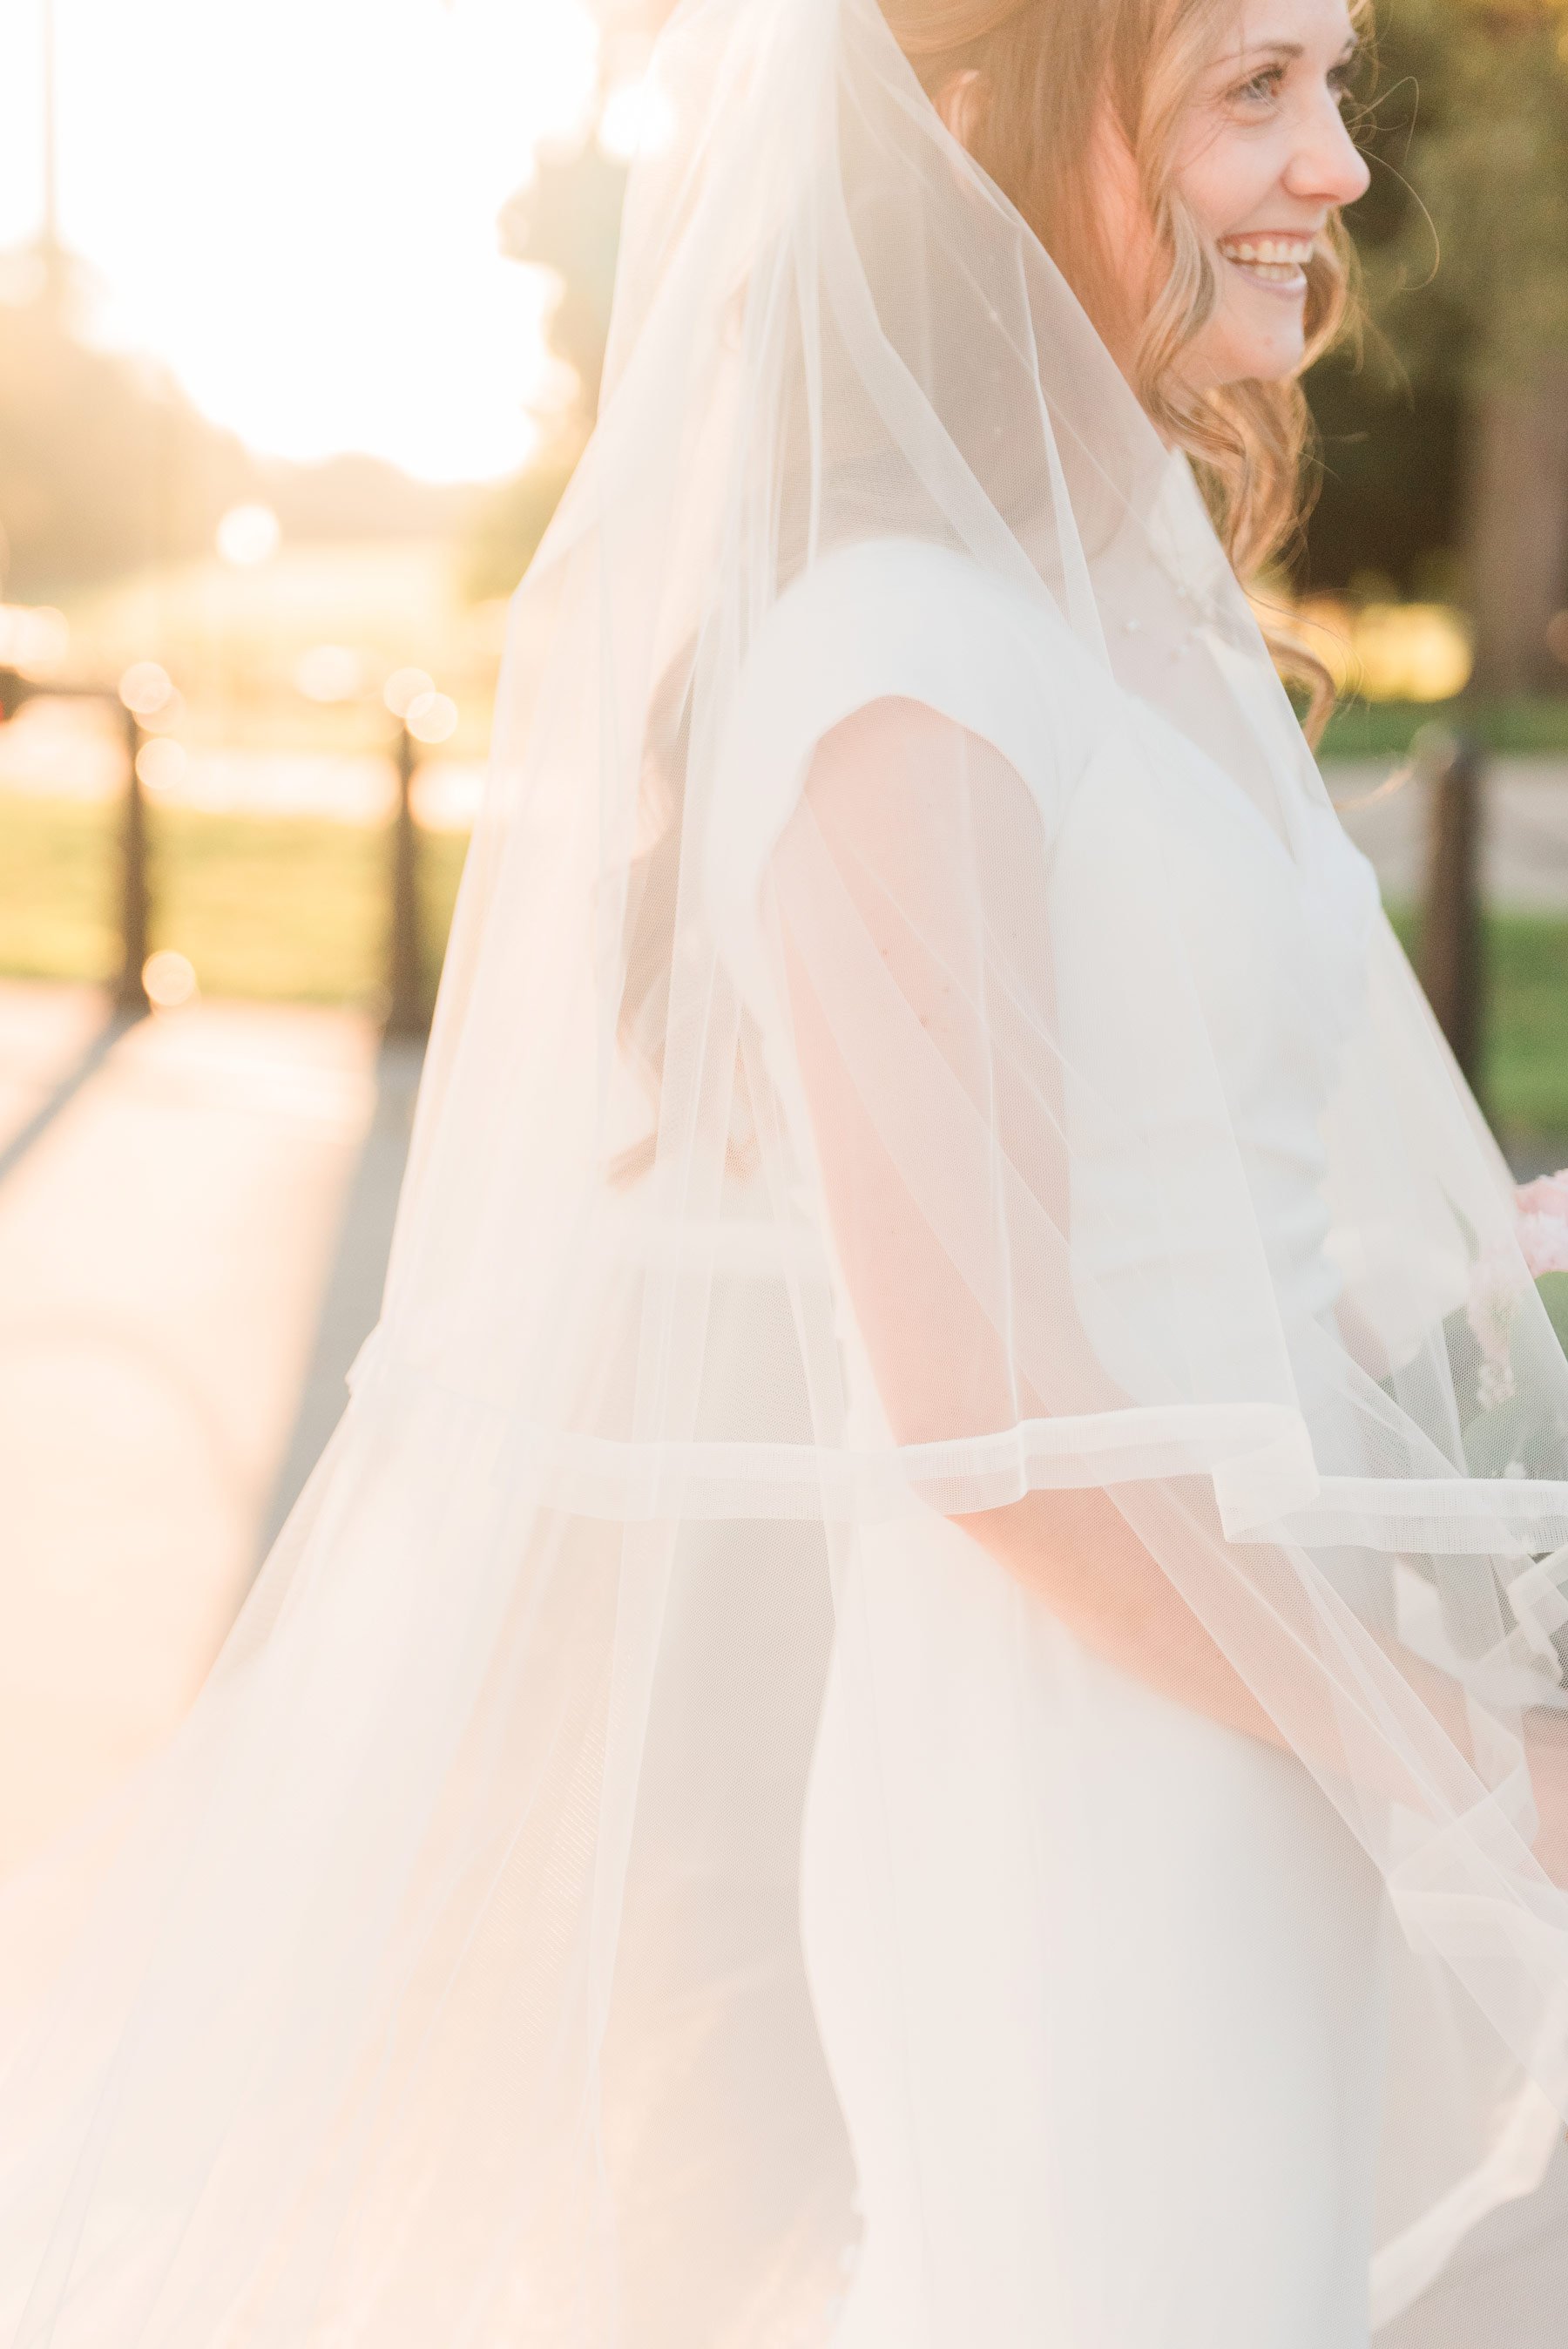    A gorgeous golden hour photo of a happy Washington DC bride at the temple grounds. #washingtondcphotography #washingtondctemple #washingtondcwedding #dcweddingphotographer #washingtondctemplewedding #eastcoastweddingphotographer #sunsetbridals #mo